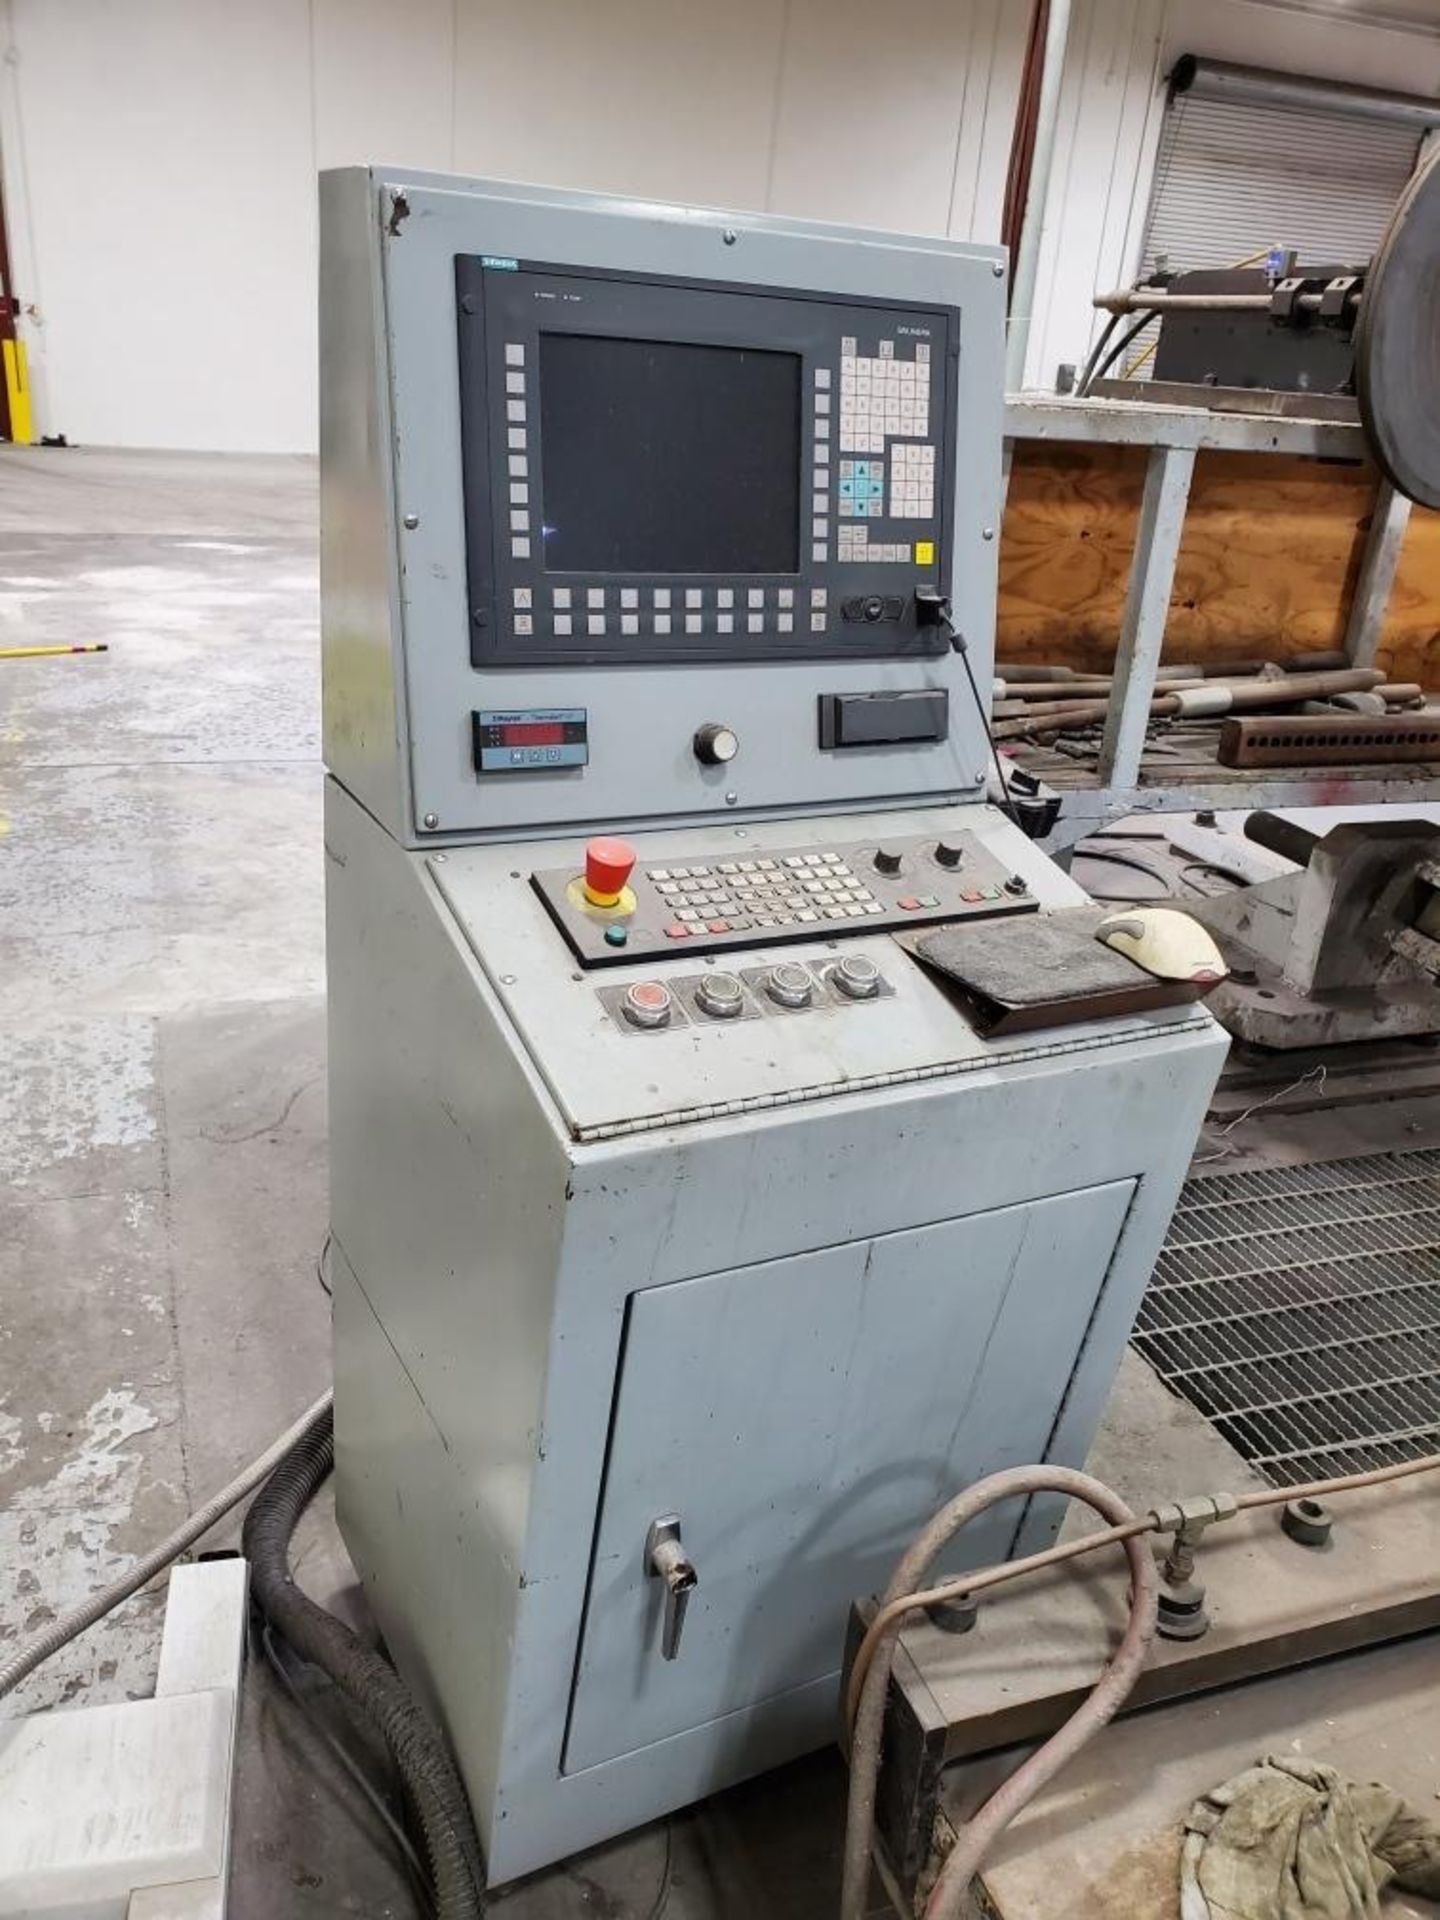 MJC Engineering mdl. SP-50200 215" CNC Spin Lathe s/n 02-603 w/ Siemens Sinumeric CNC, SOLD AS IS - Image 3 of 18